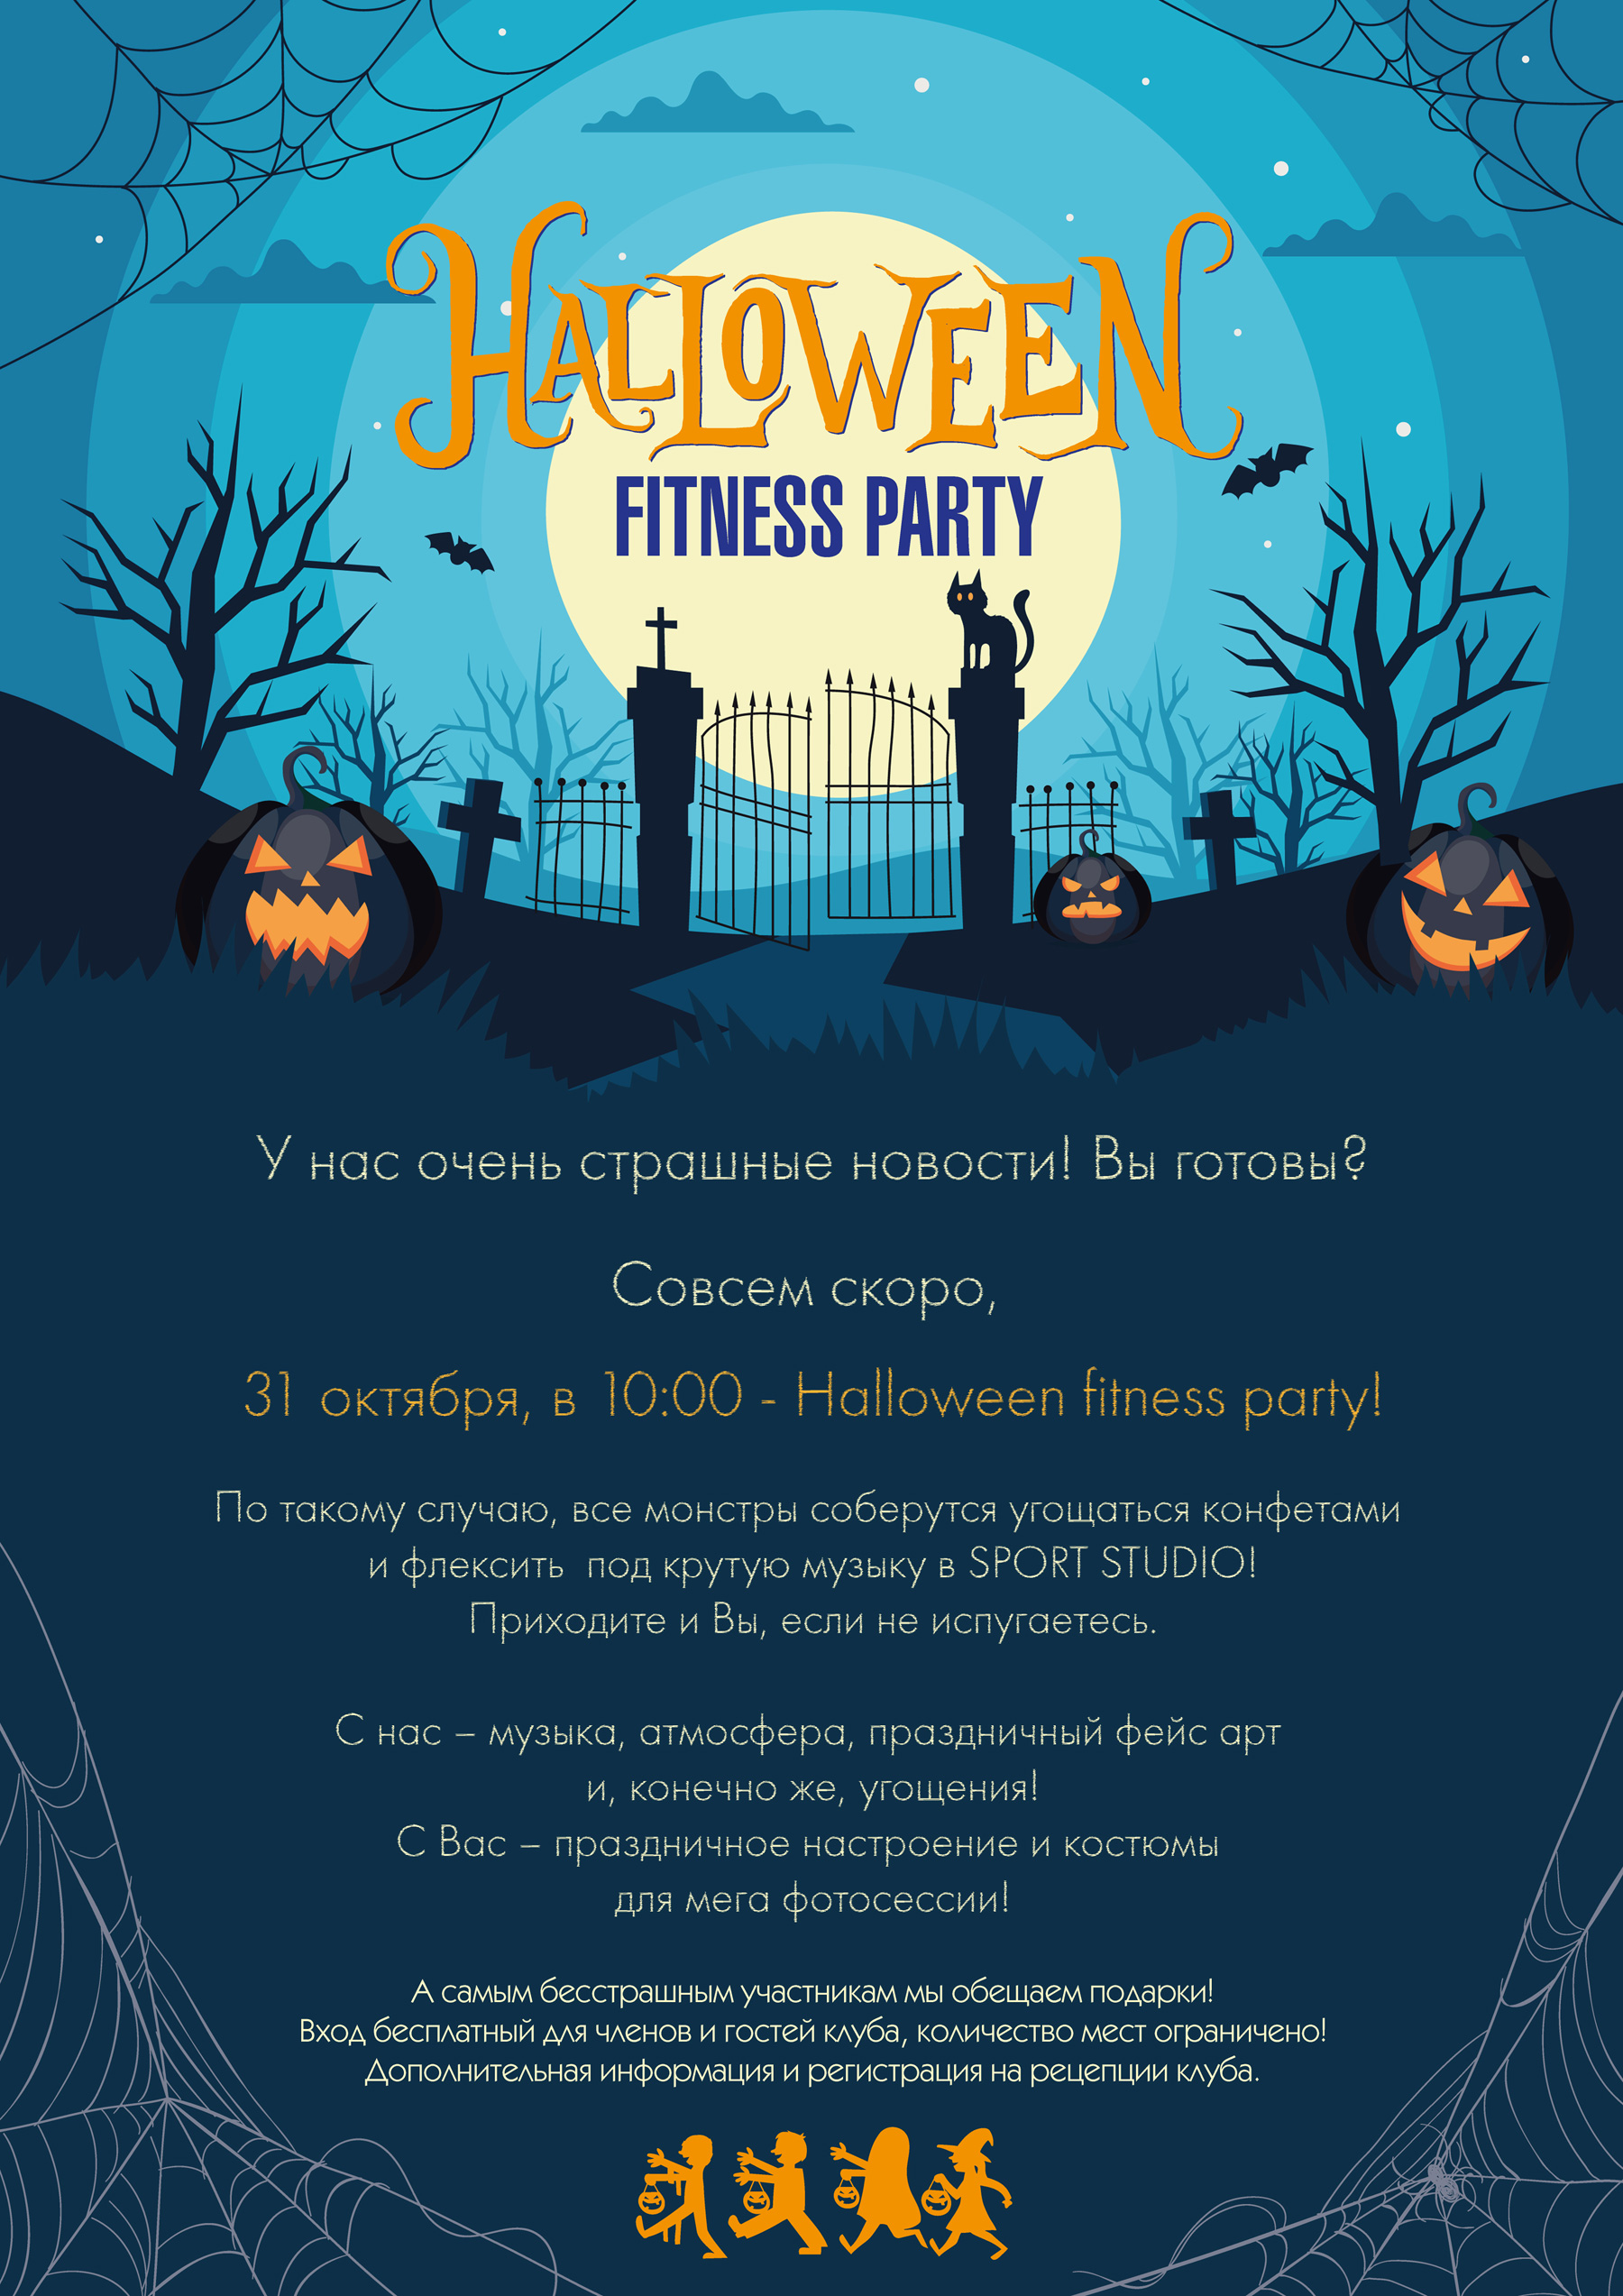 HALLOWEEN FITNESS PARTY!